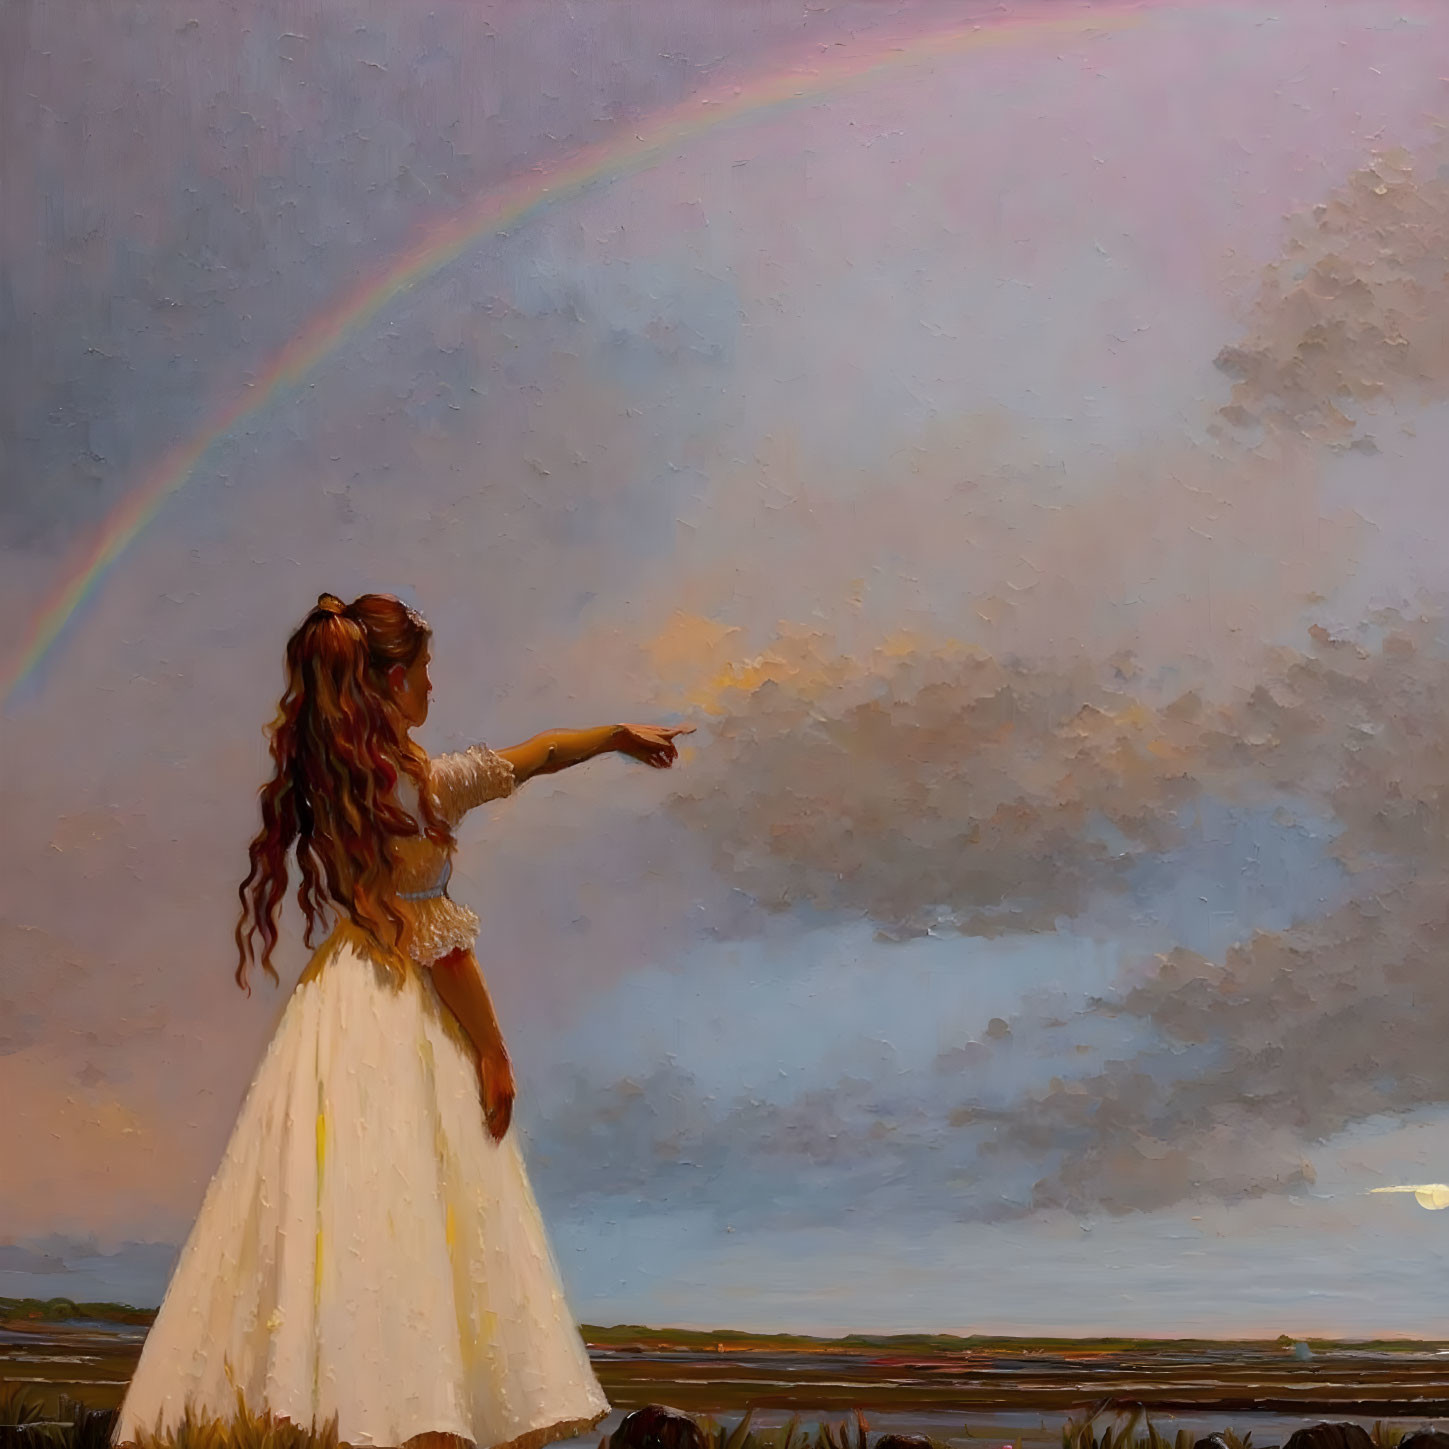 Woman in white dress pointing at rainbow under dramatic sky